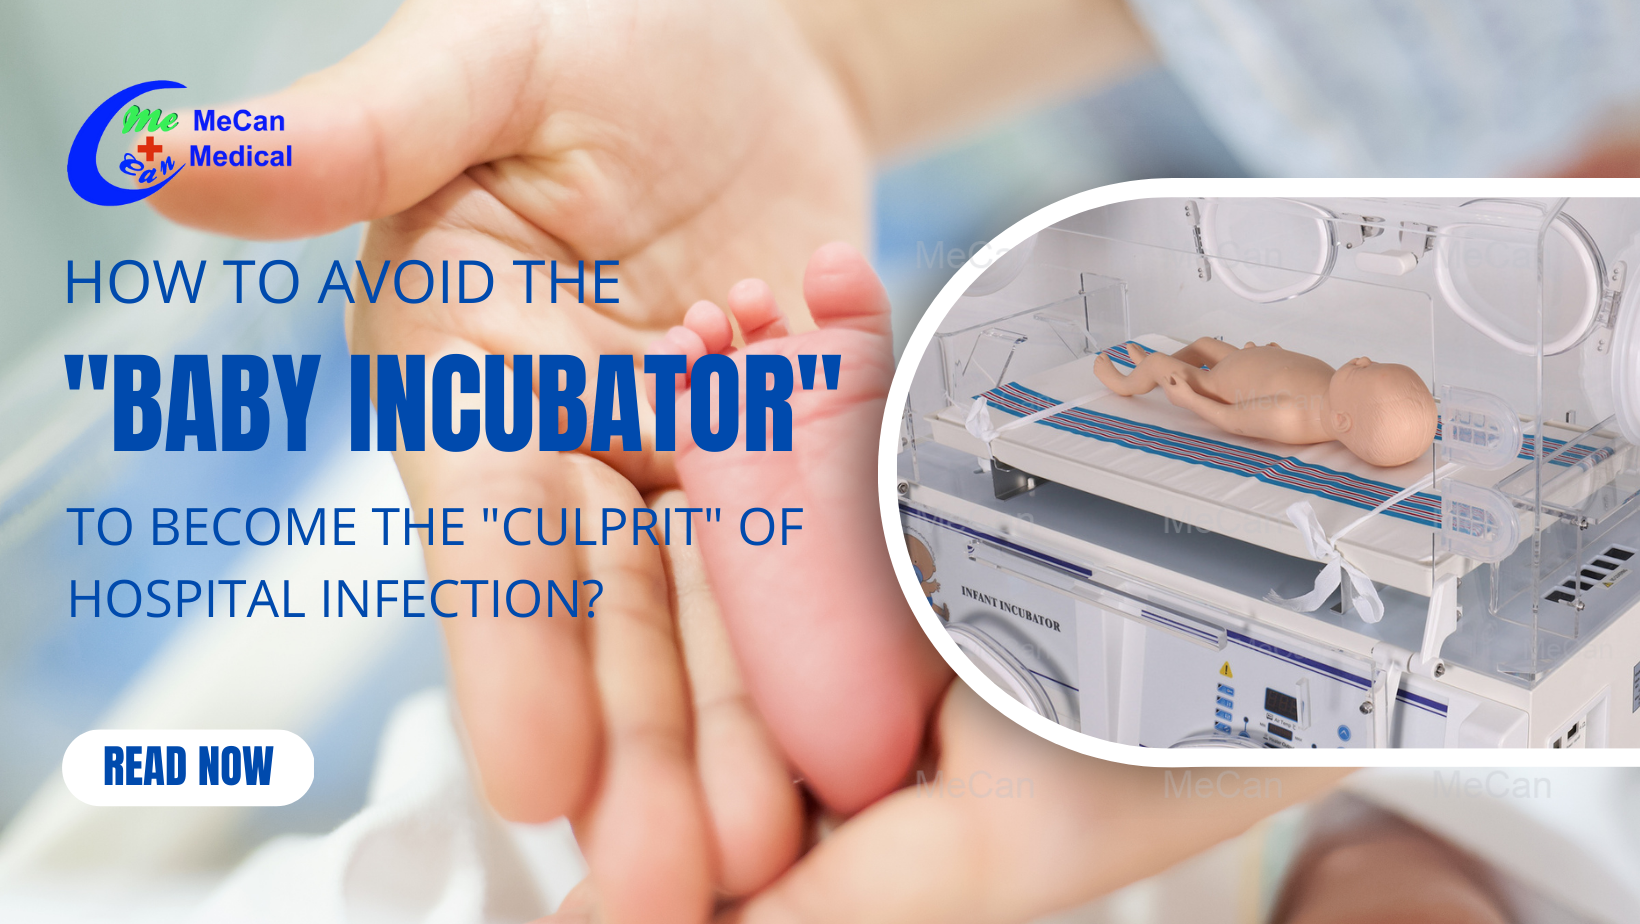 How to avoid the "baby incubator" to become the "culprit" of hospital infection?